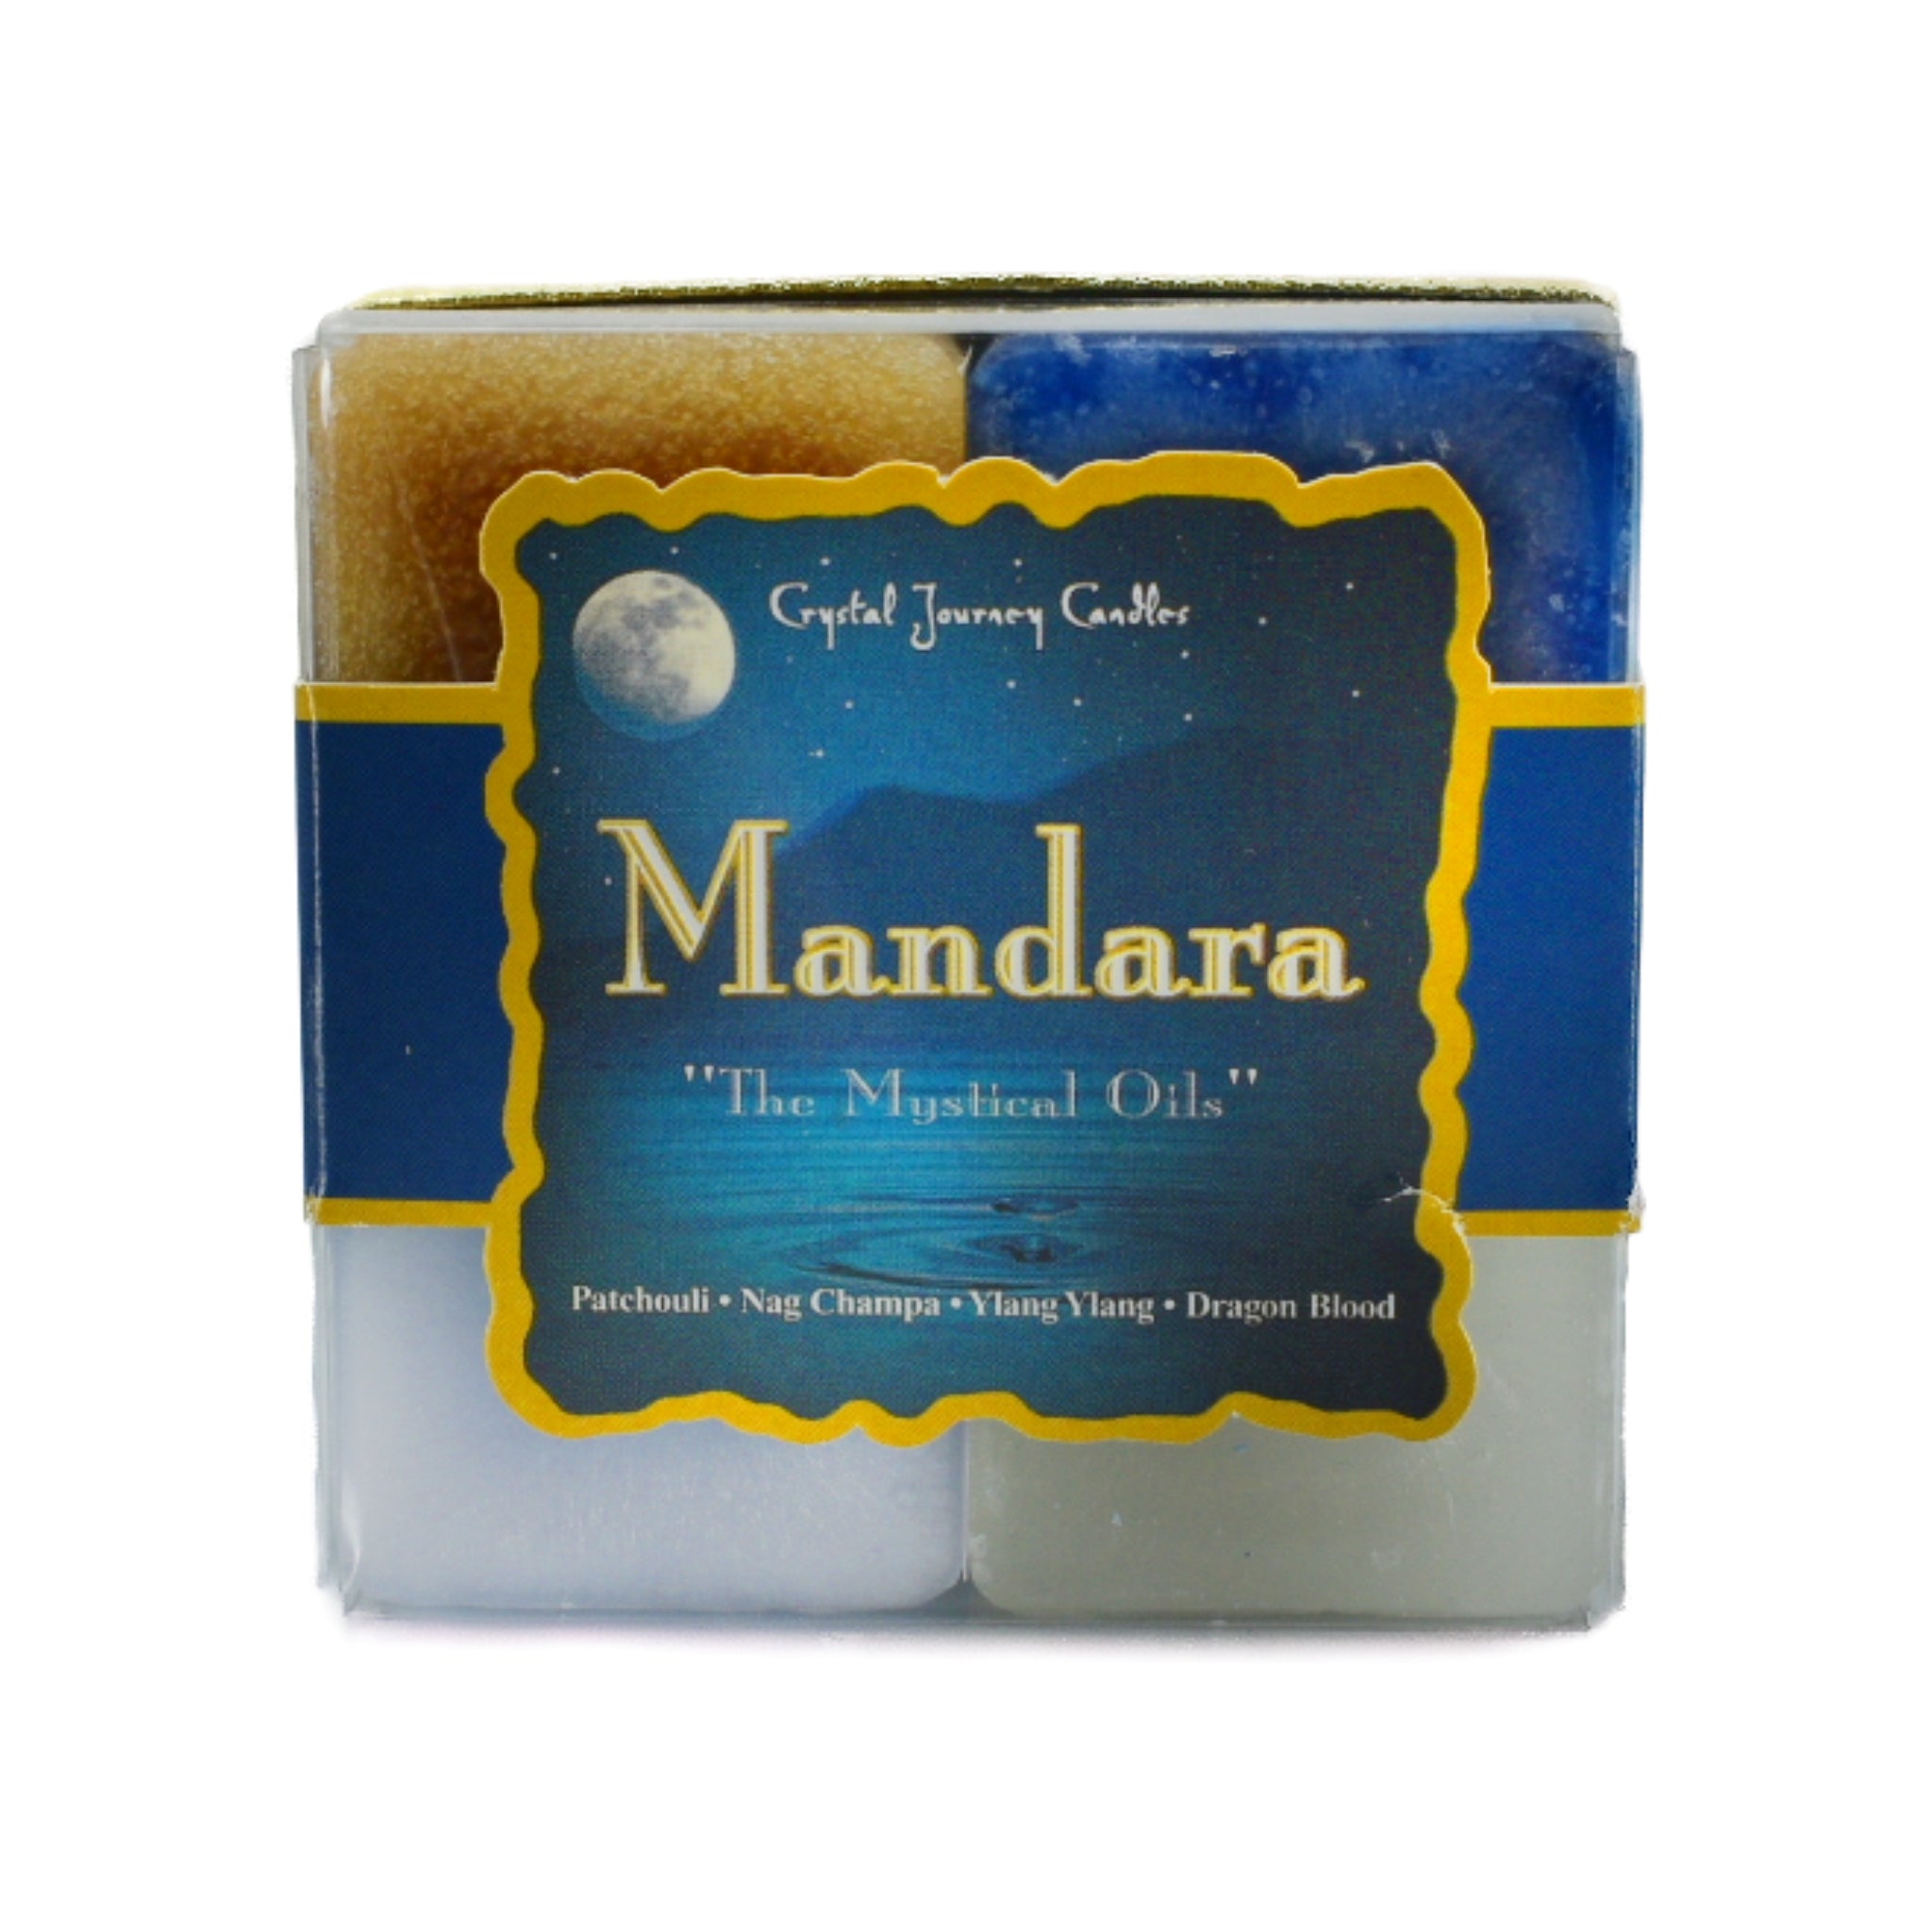 Mandara Square Pack Candle.  Candle scented with &quot;The Mystical Oils&quot; patchouli, nag champa, slang slang, and mystical dragon&